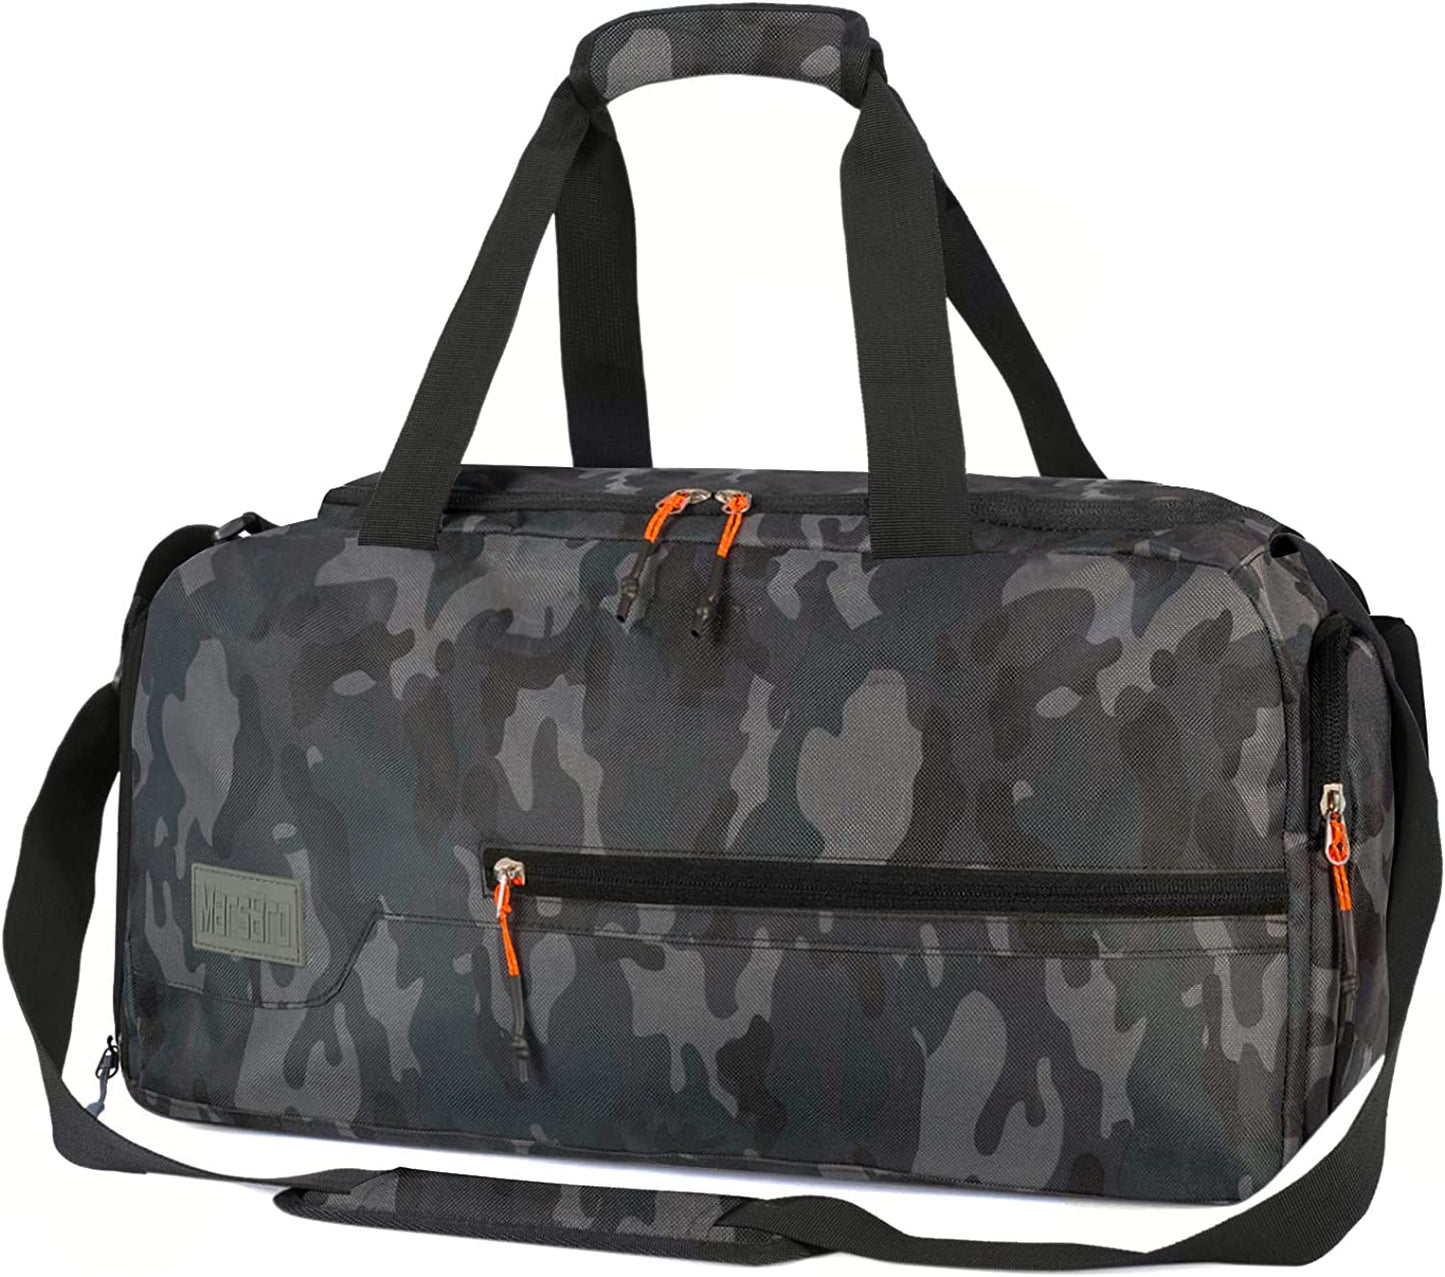 MarsBro Water Resistant Sports Gym Travel Weekender Duffel Bag with Shoe Compartment